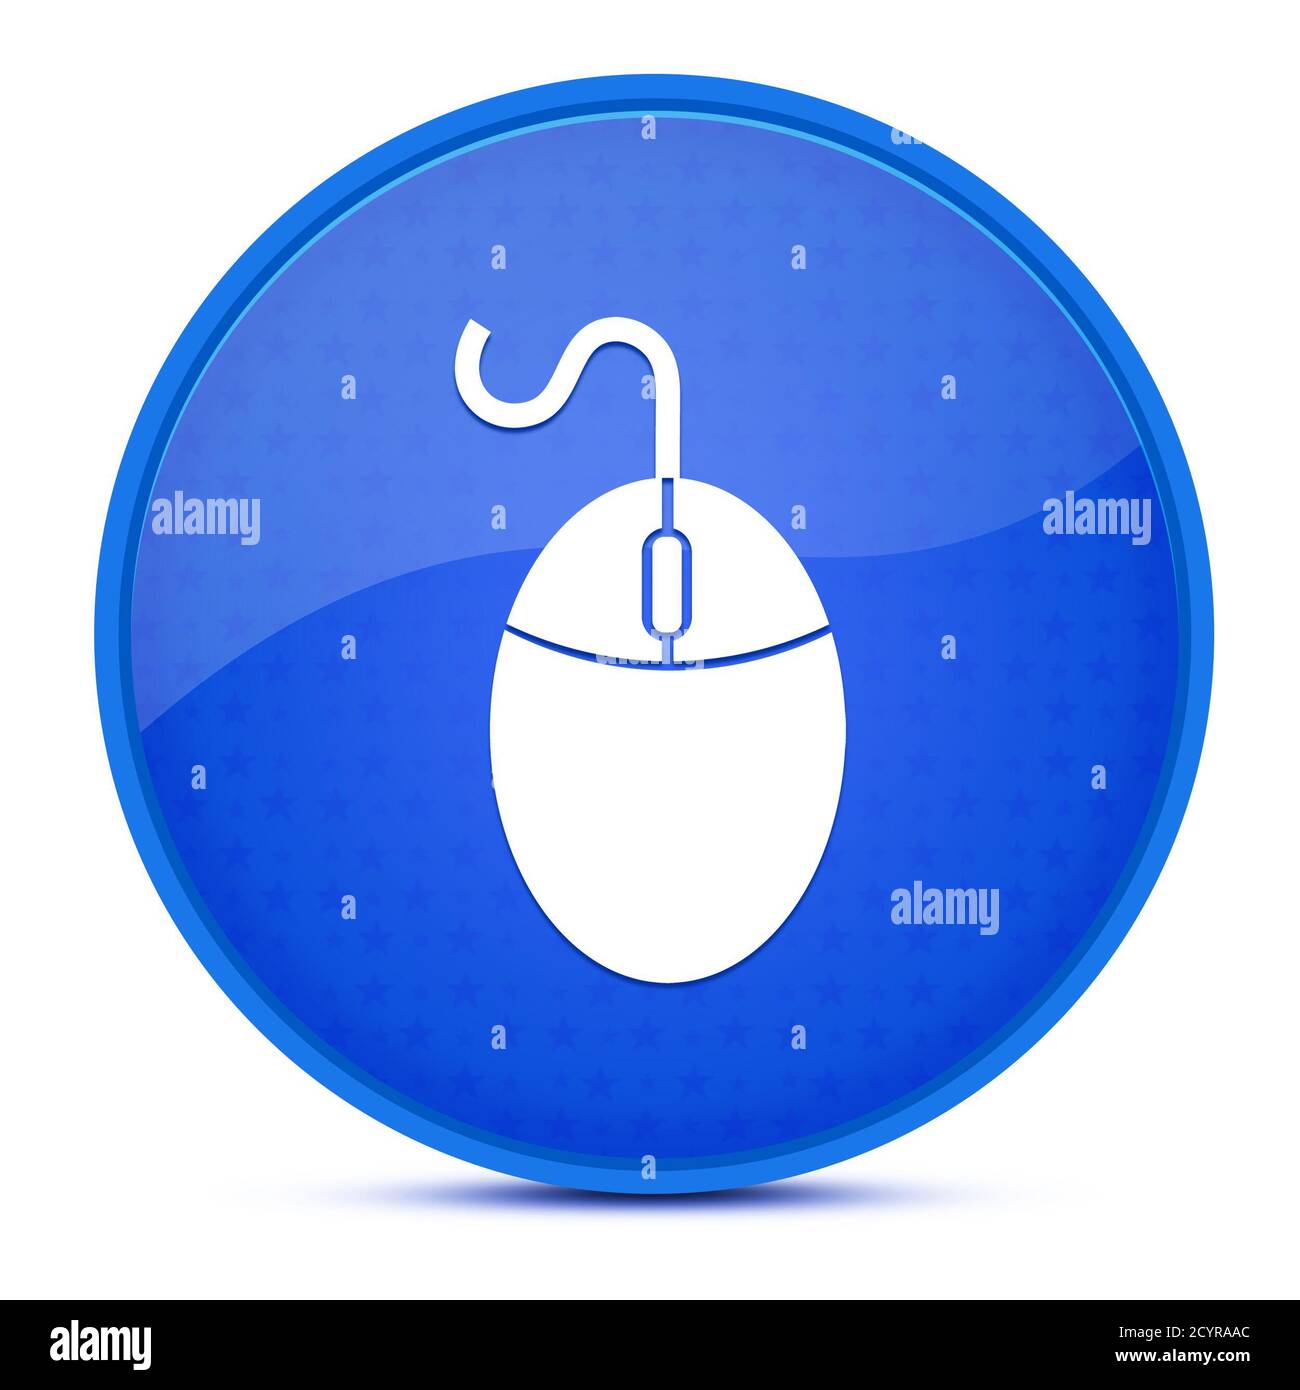 Mouse aesthetic glossy blue round button abstract illustration Stock Photo